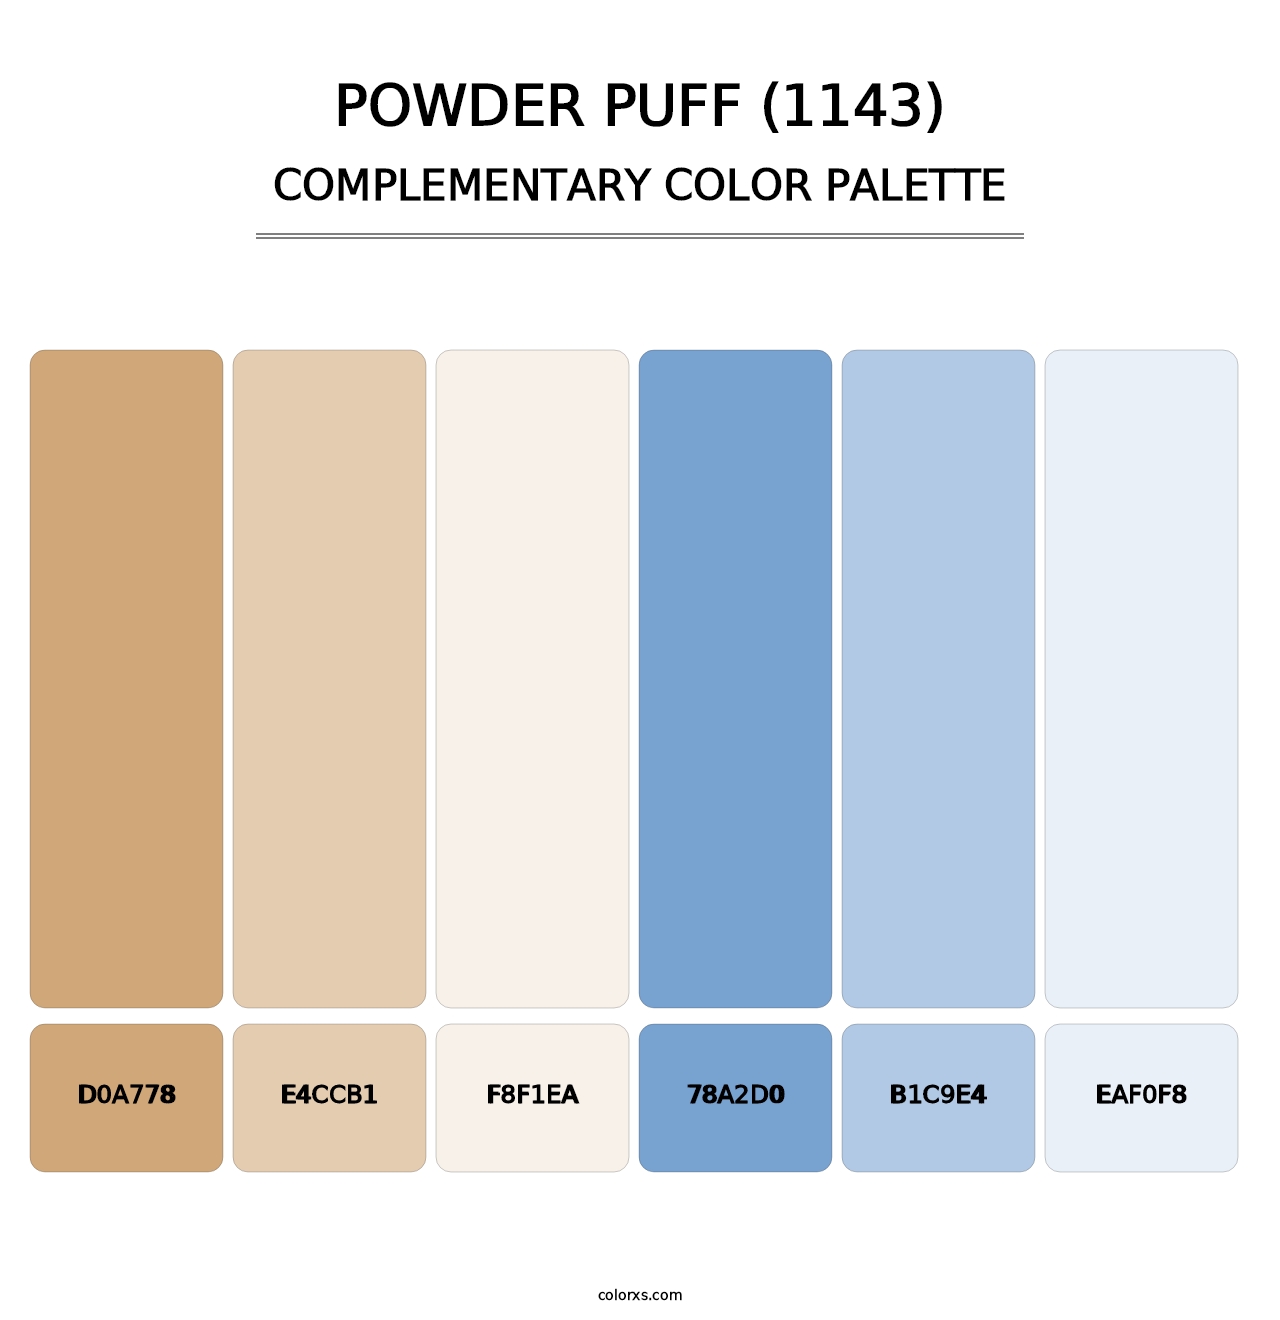 Powder Puff (1143) - Complementary Color Palette